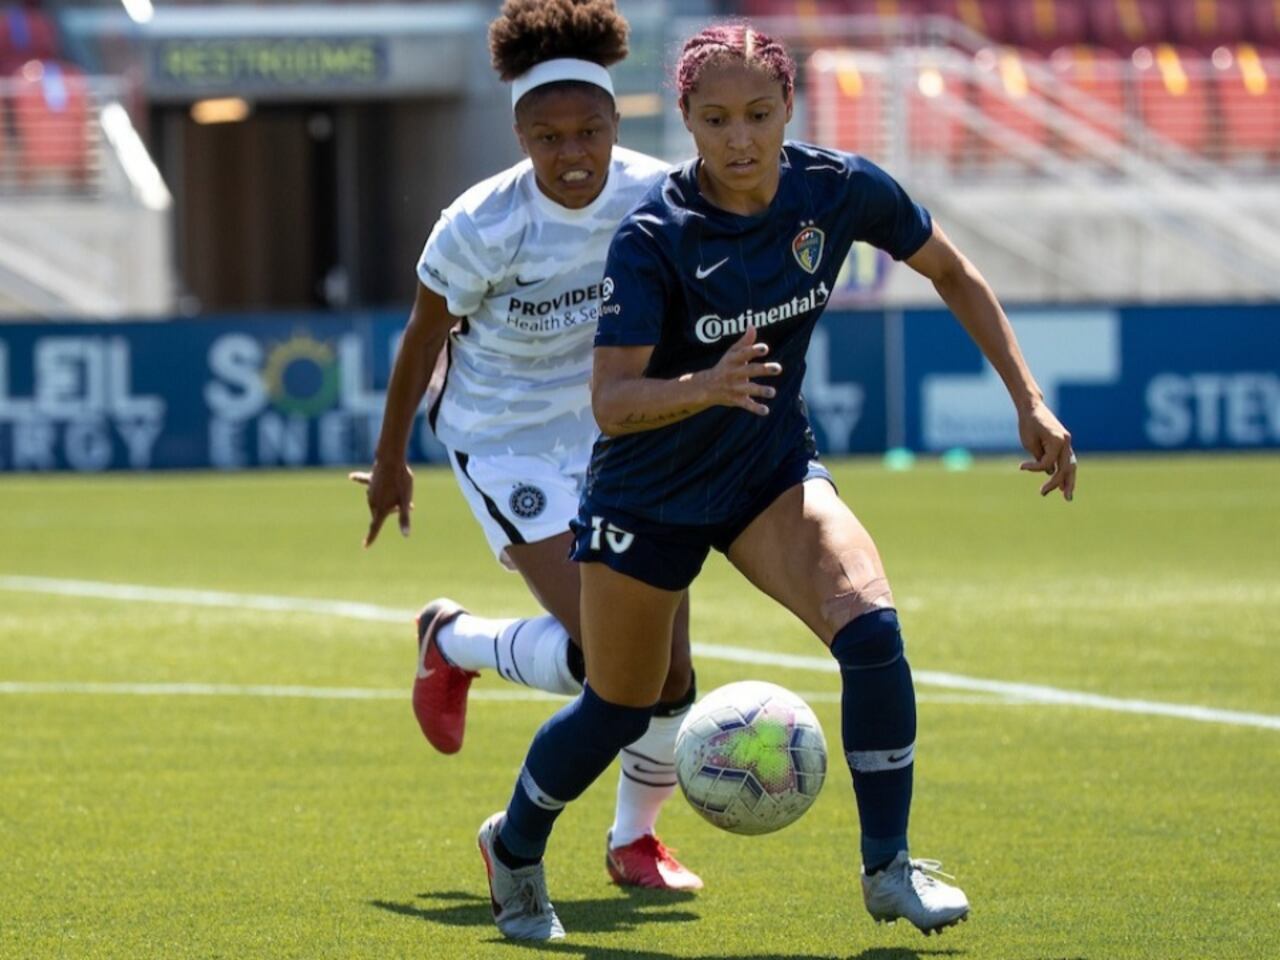 Jaelene Daniels comes out of retirement and returns to NC Courage